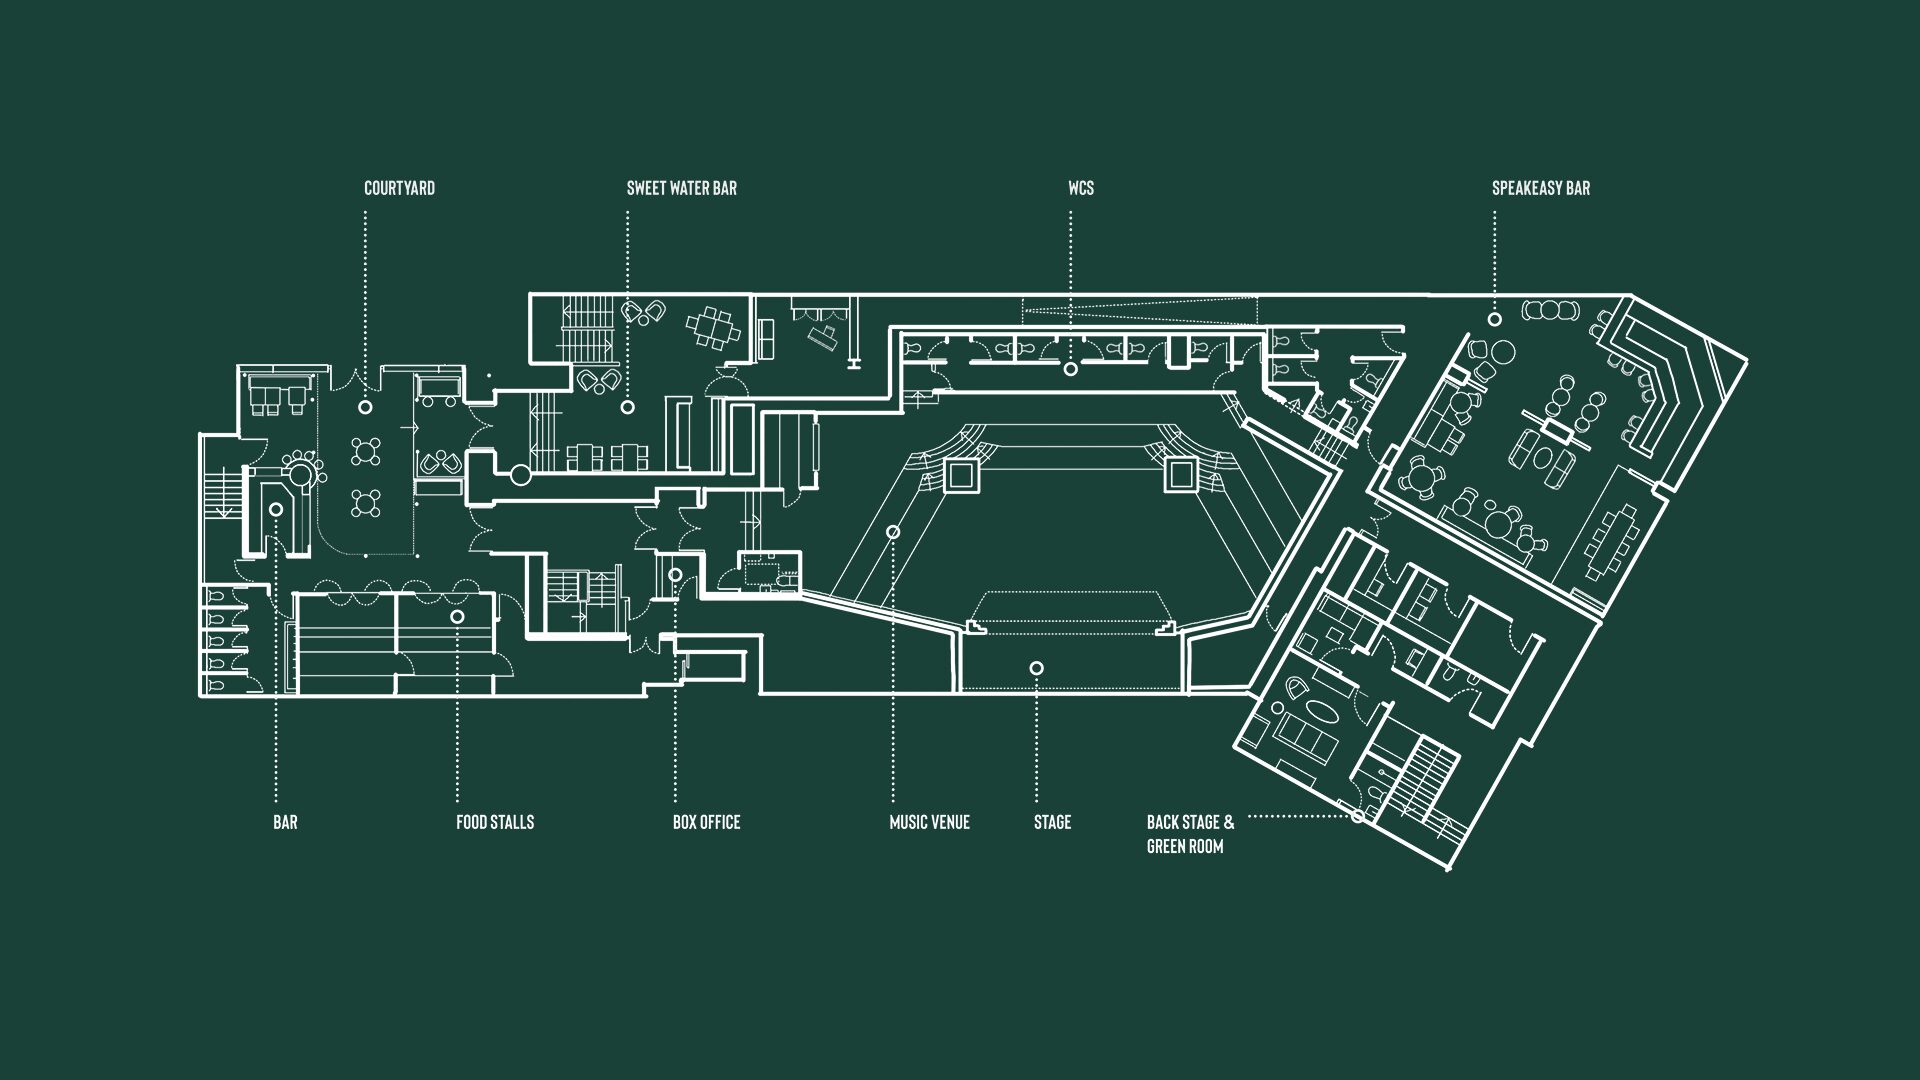 Architectural plan of Goods Way King's Cross London, Lafayette Music Venue, Nola's Speakeasy Bar London designed by 3Stories Interior Design and branding creative agency